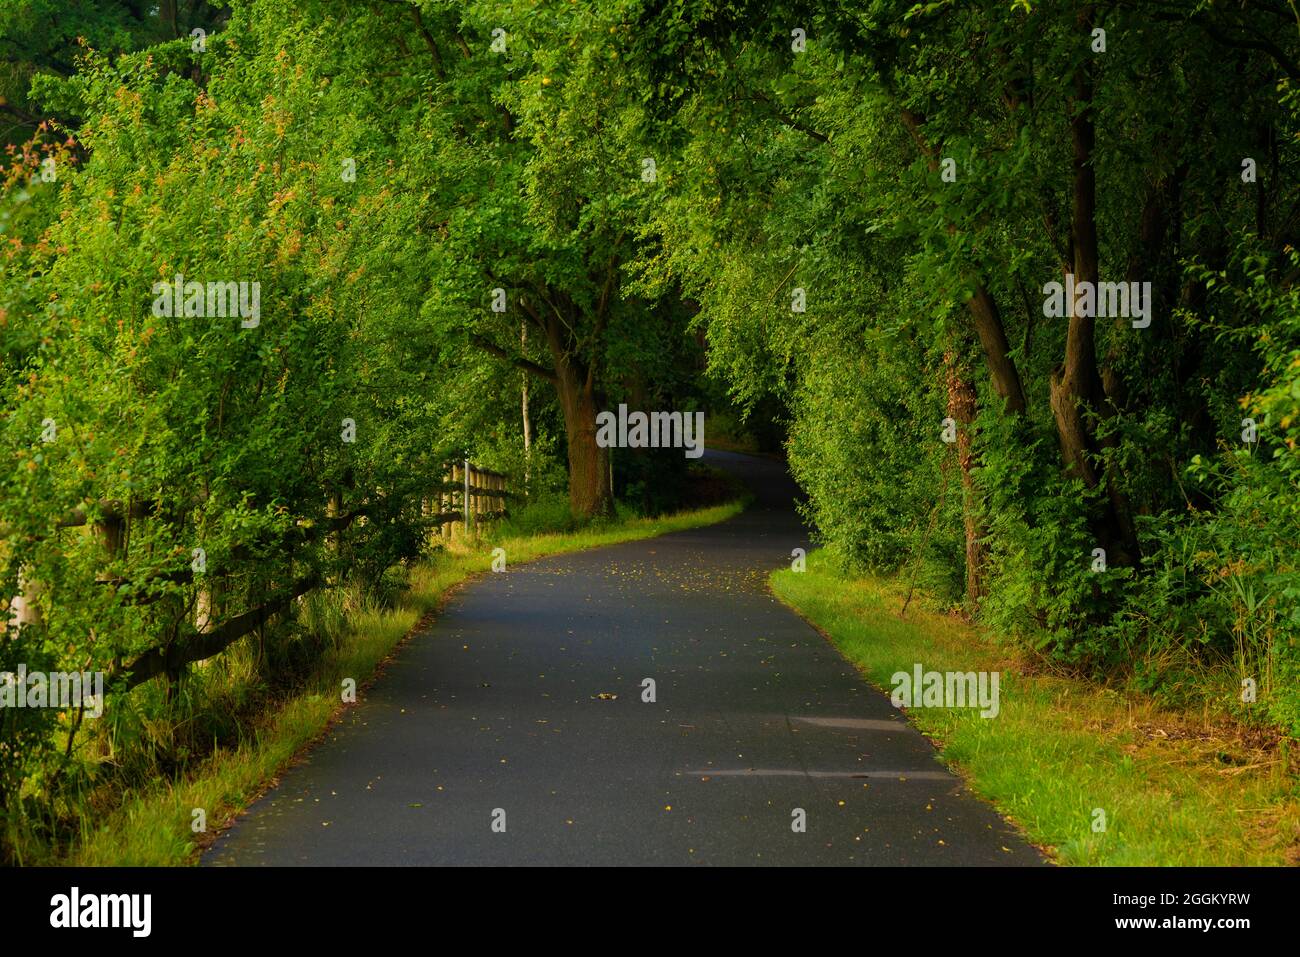 Bike path in the early morning, along the way a wooden fence and plum trees Stock Photo